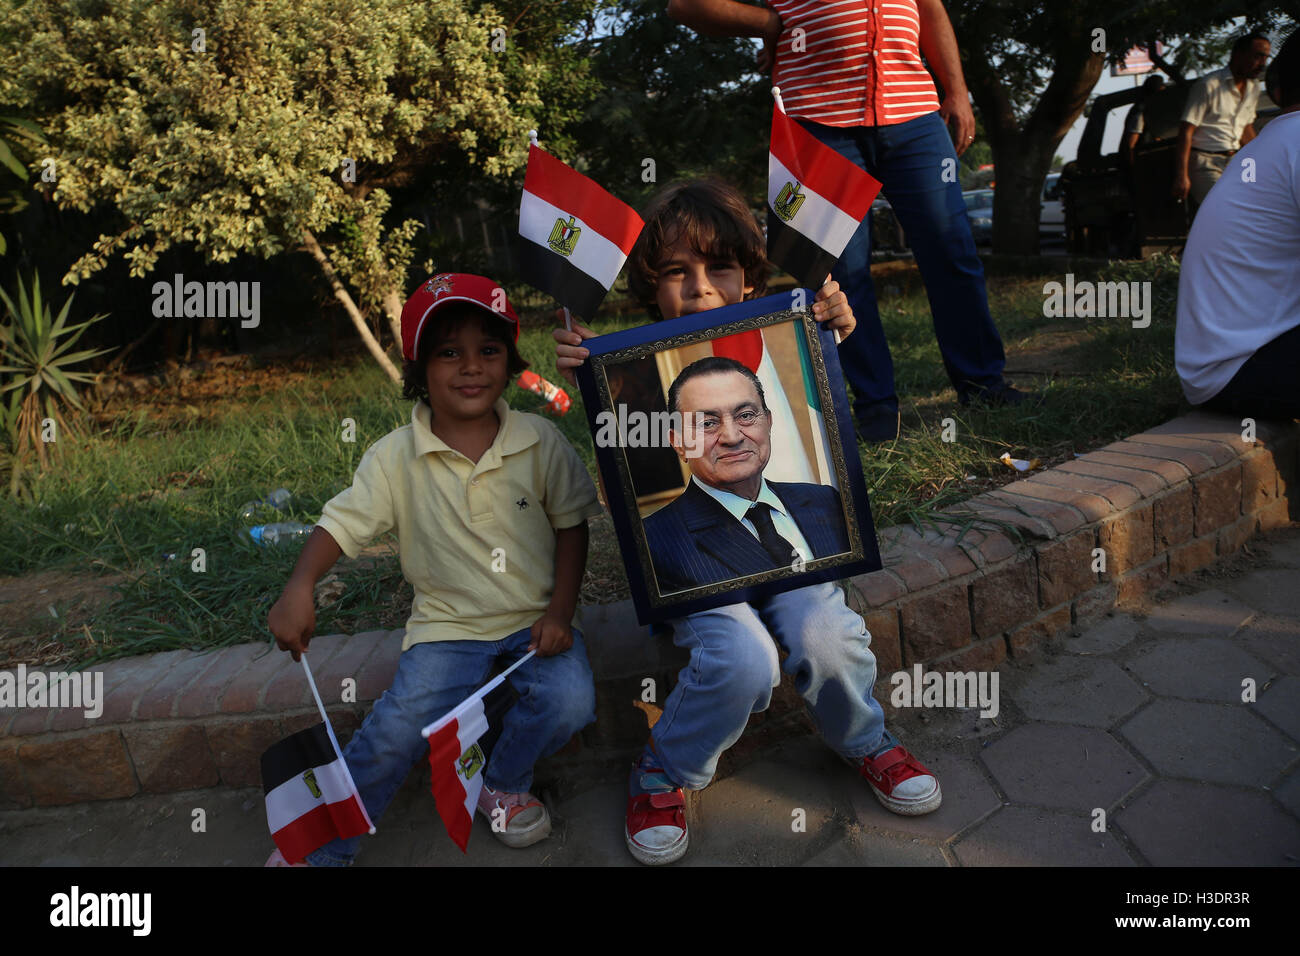 Cairo, Egypt. 6th Oct, 2016. Supporters of Egypt's former President Hosni Mubarak celebrate the 43rd anniversary of the October 6 War in 1973 against Israel outside Maadi Armed Forces Hospital in Cairo, Egypt, Oct. 6, 2016. © Ahmed Gomaa/Xinhua/Alamy Live News Stock Photo